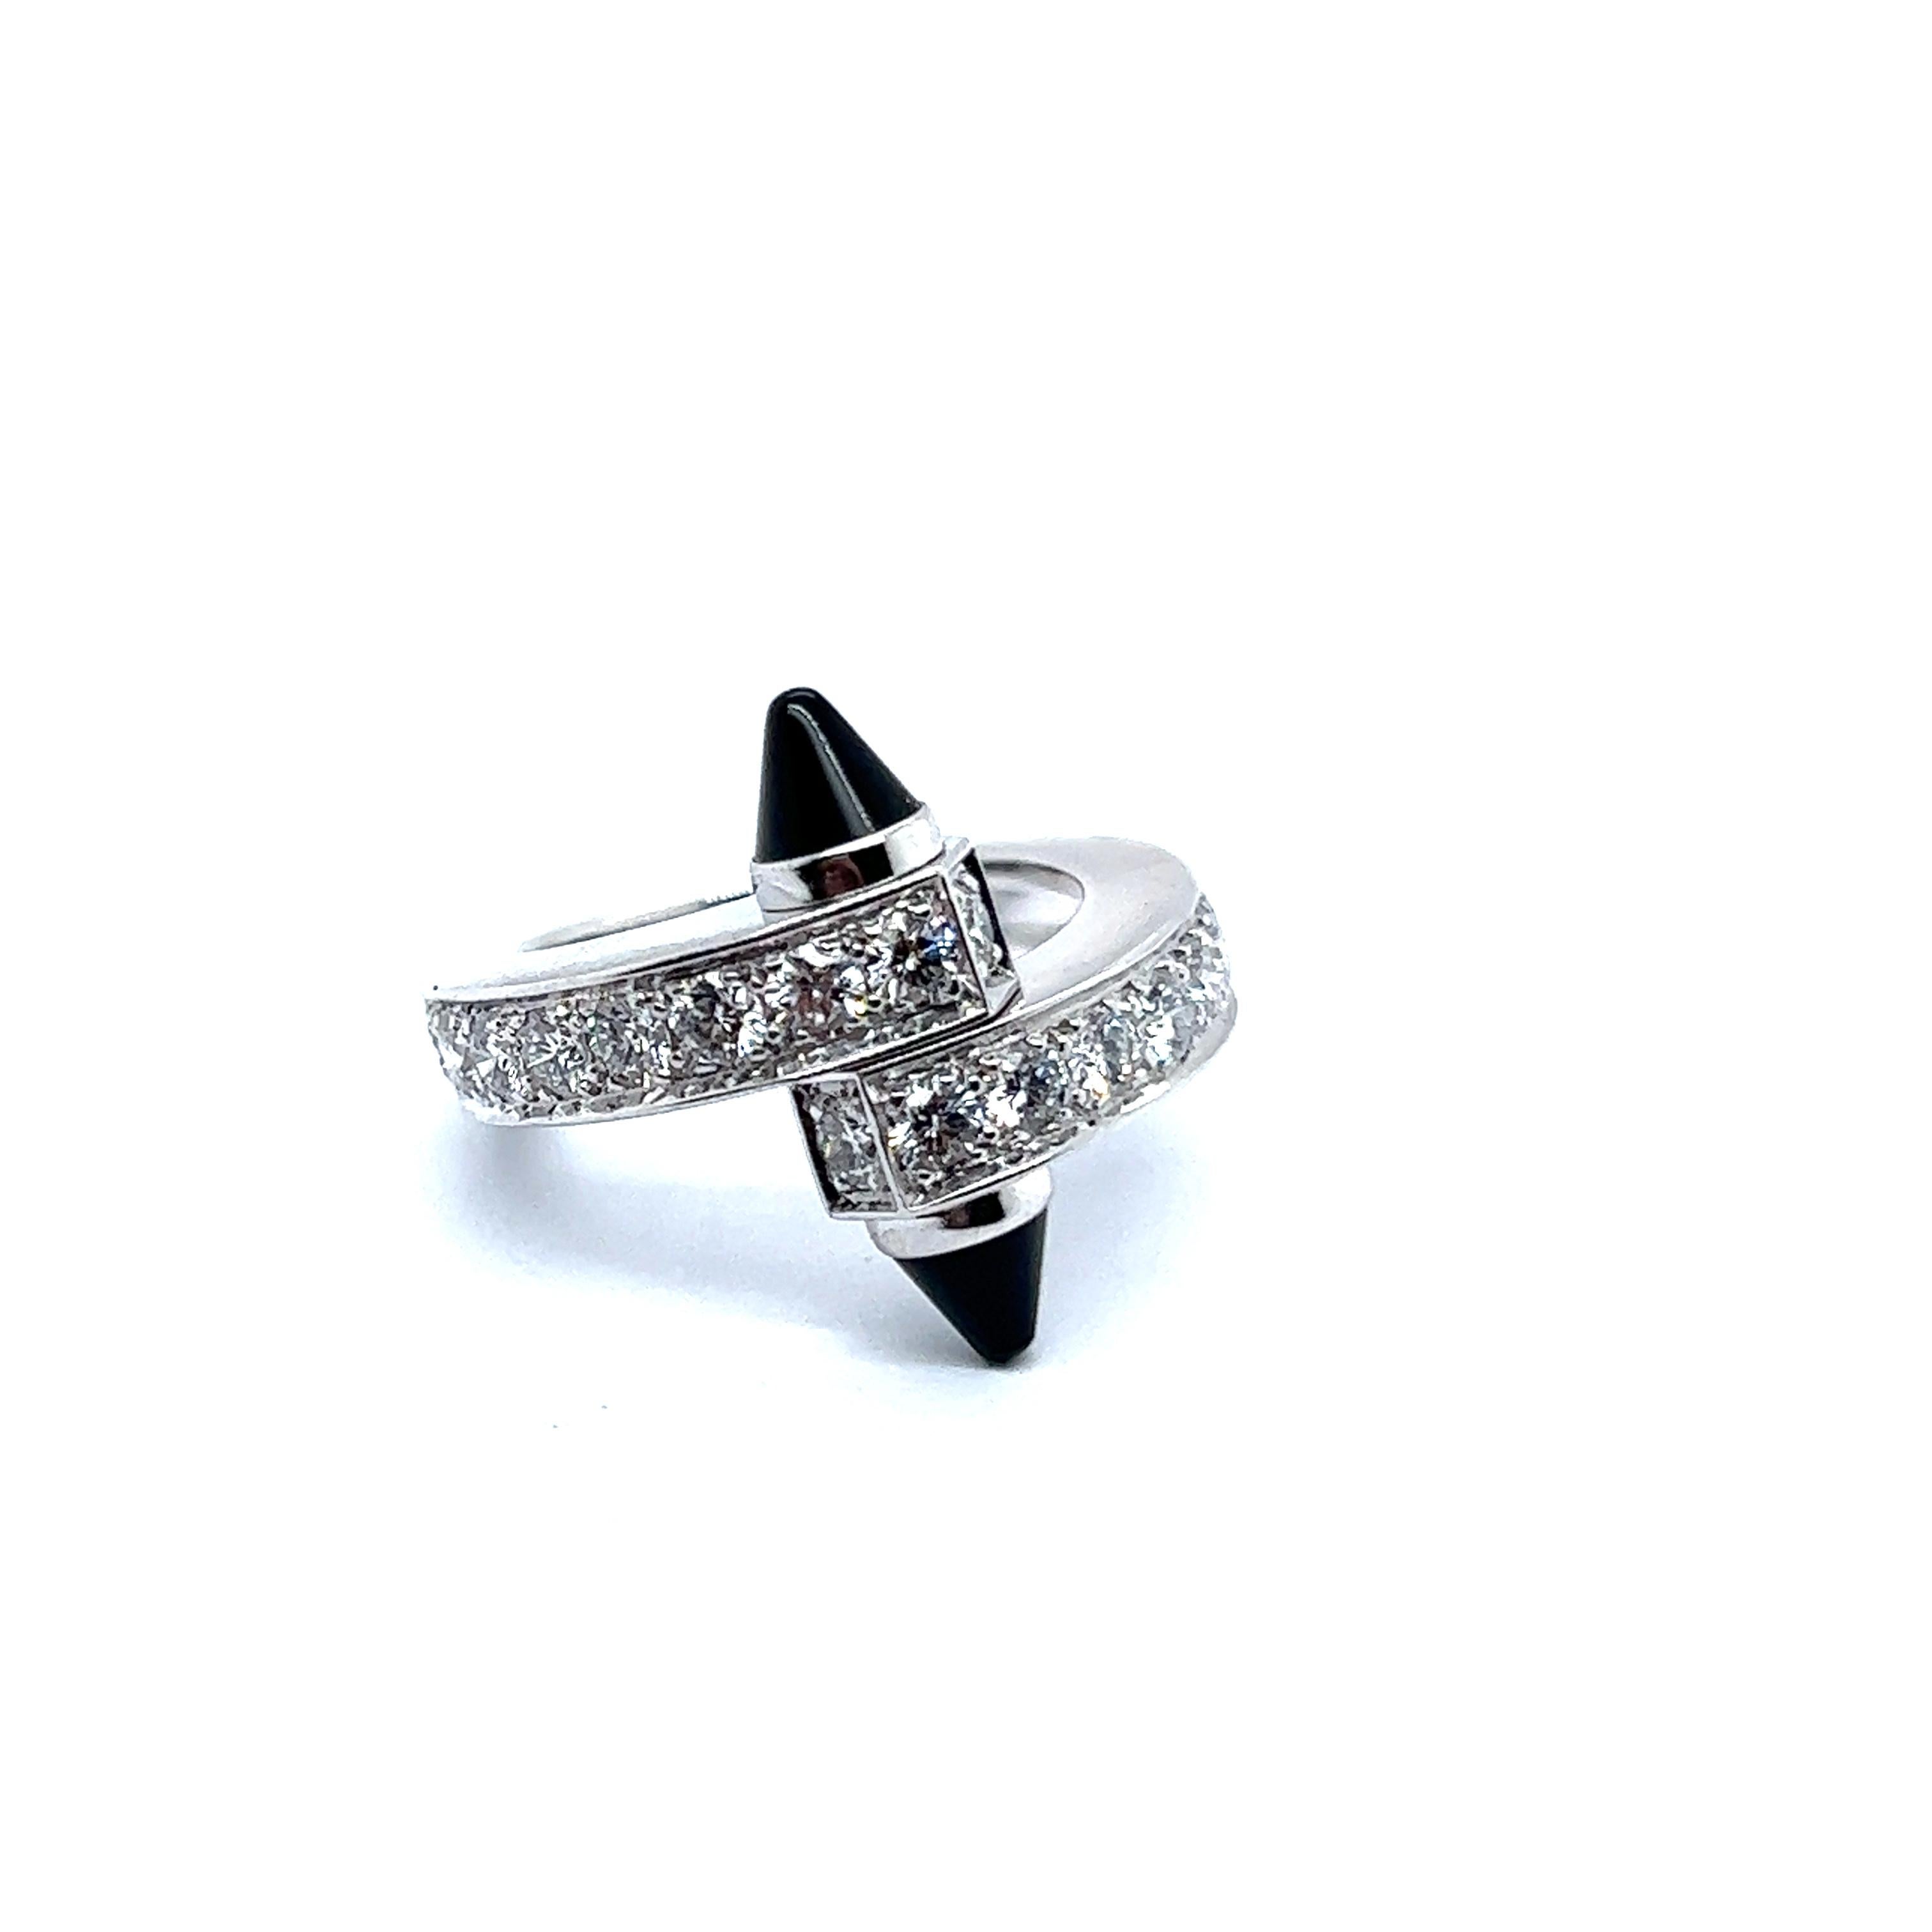 Brilliant Cut Cartier Menotte Ring with Diamonds and Onyx in 18 Karat White Gold 